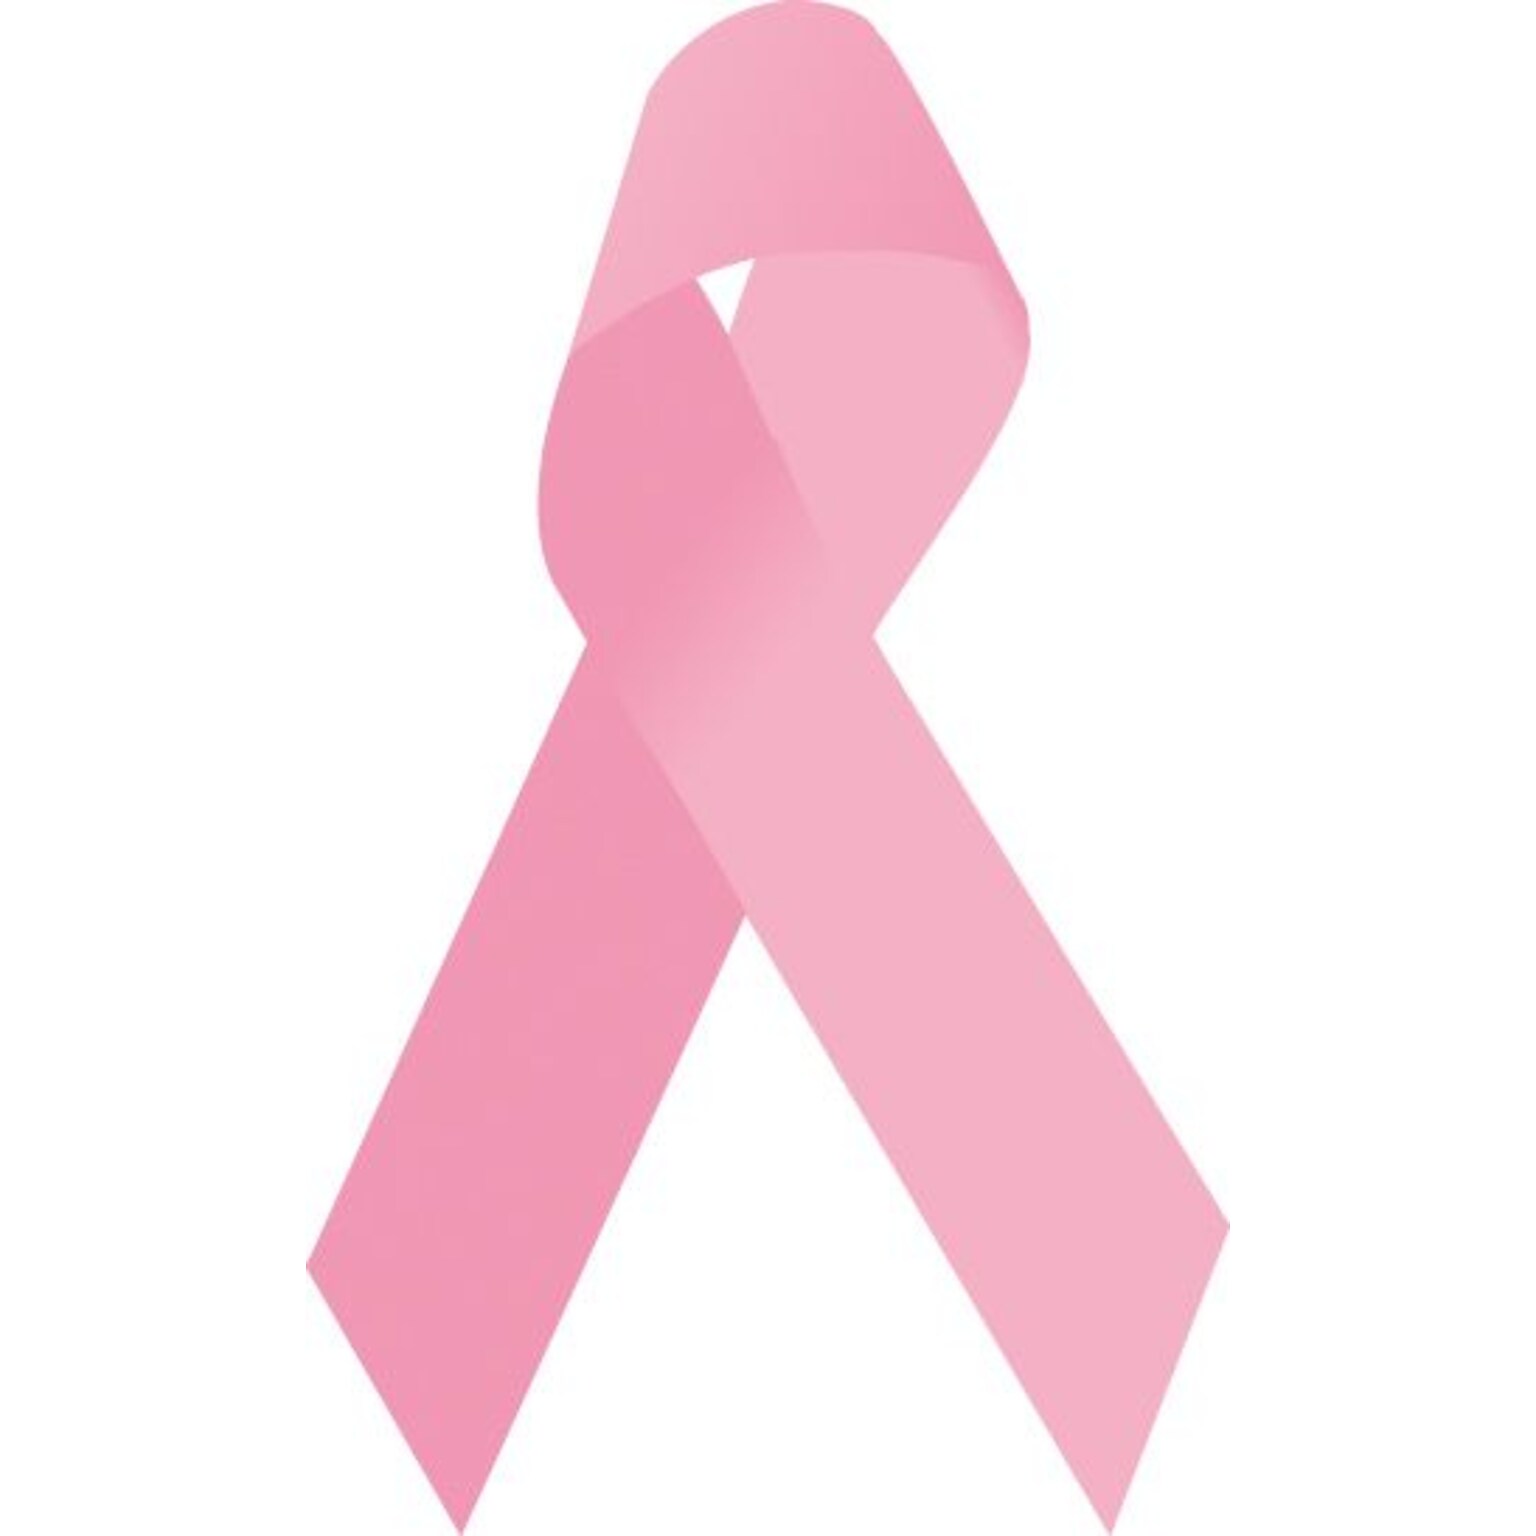 Donate $5 to Breast Cancer Awareness